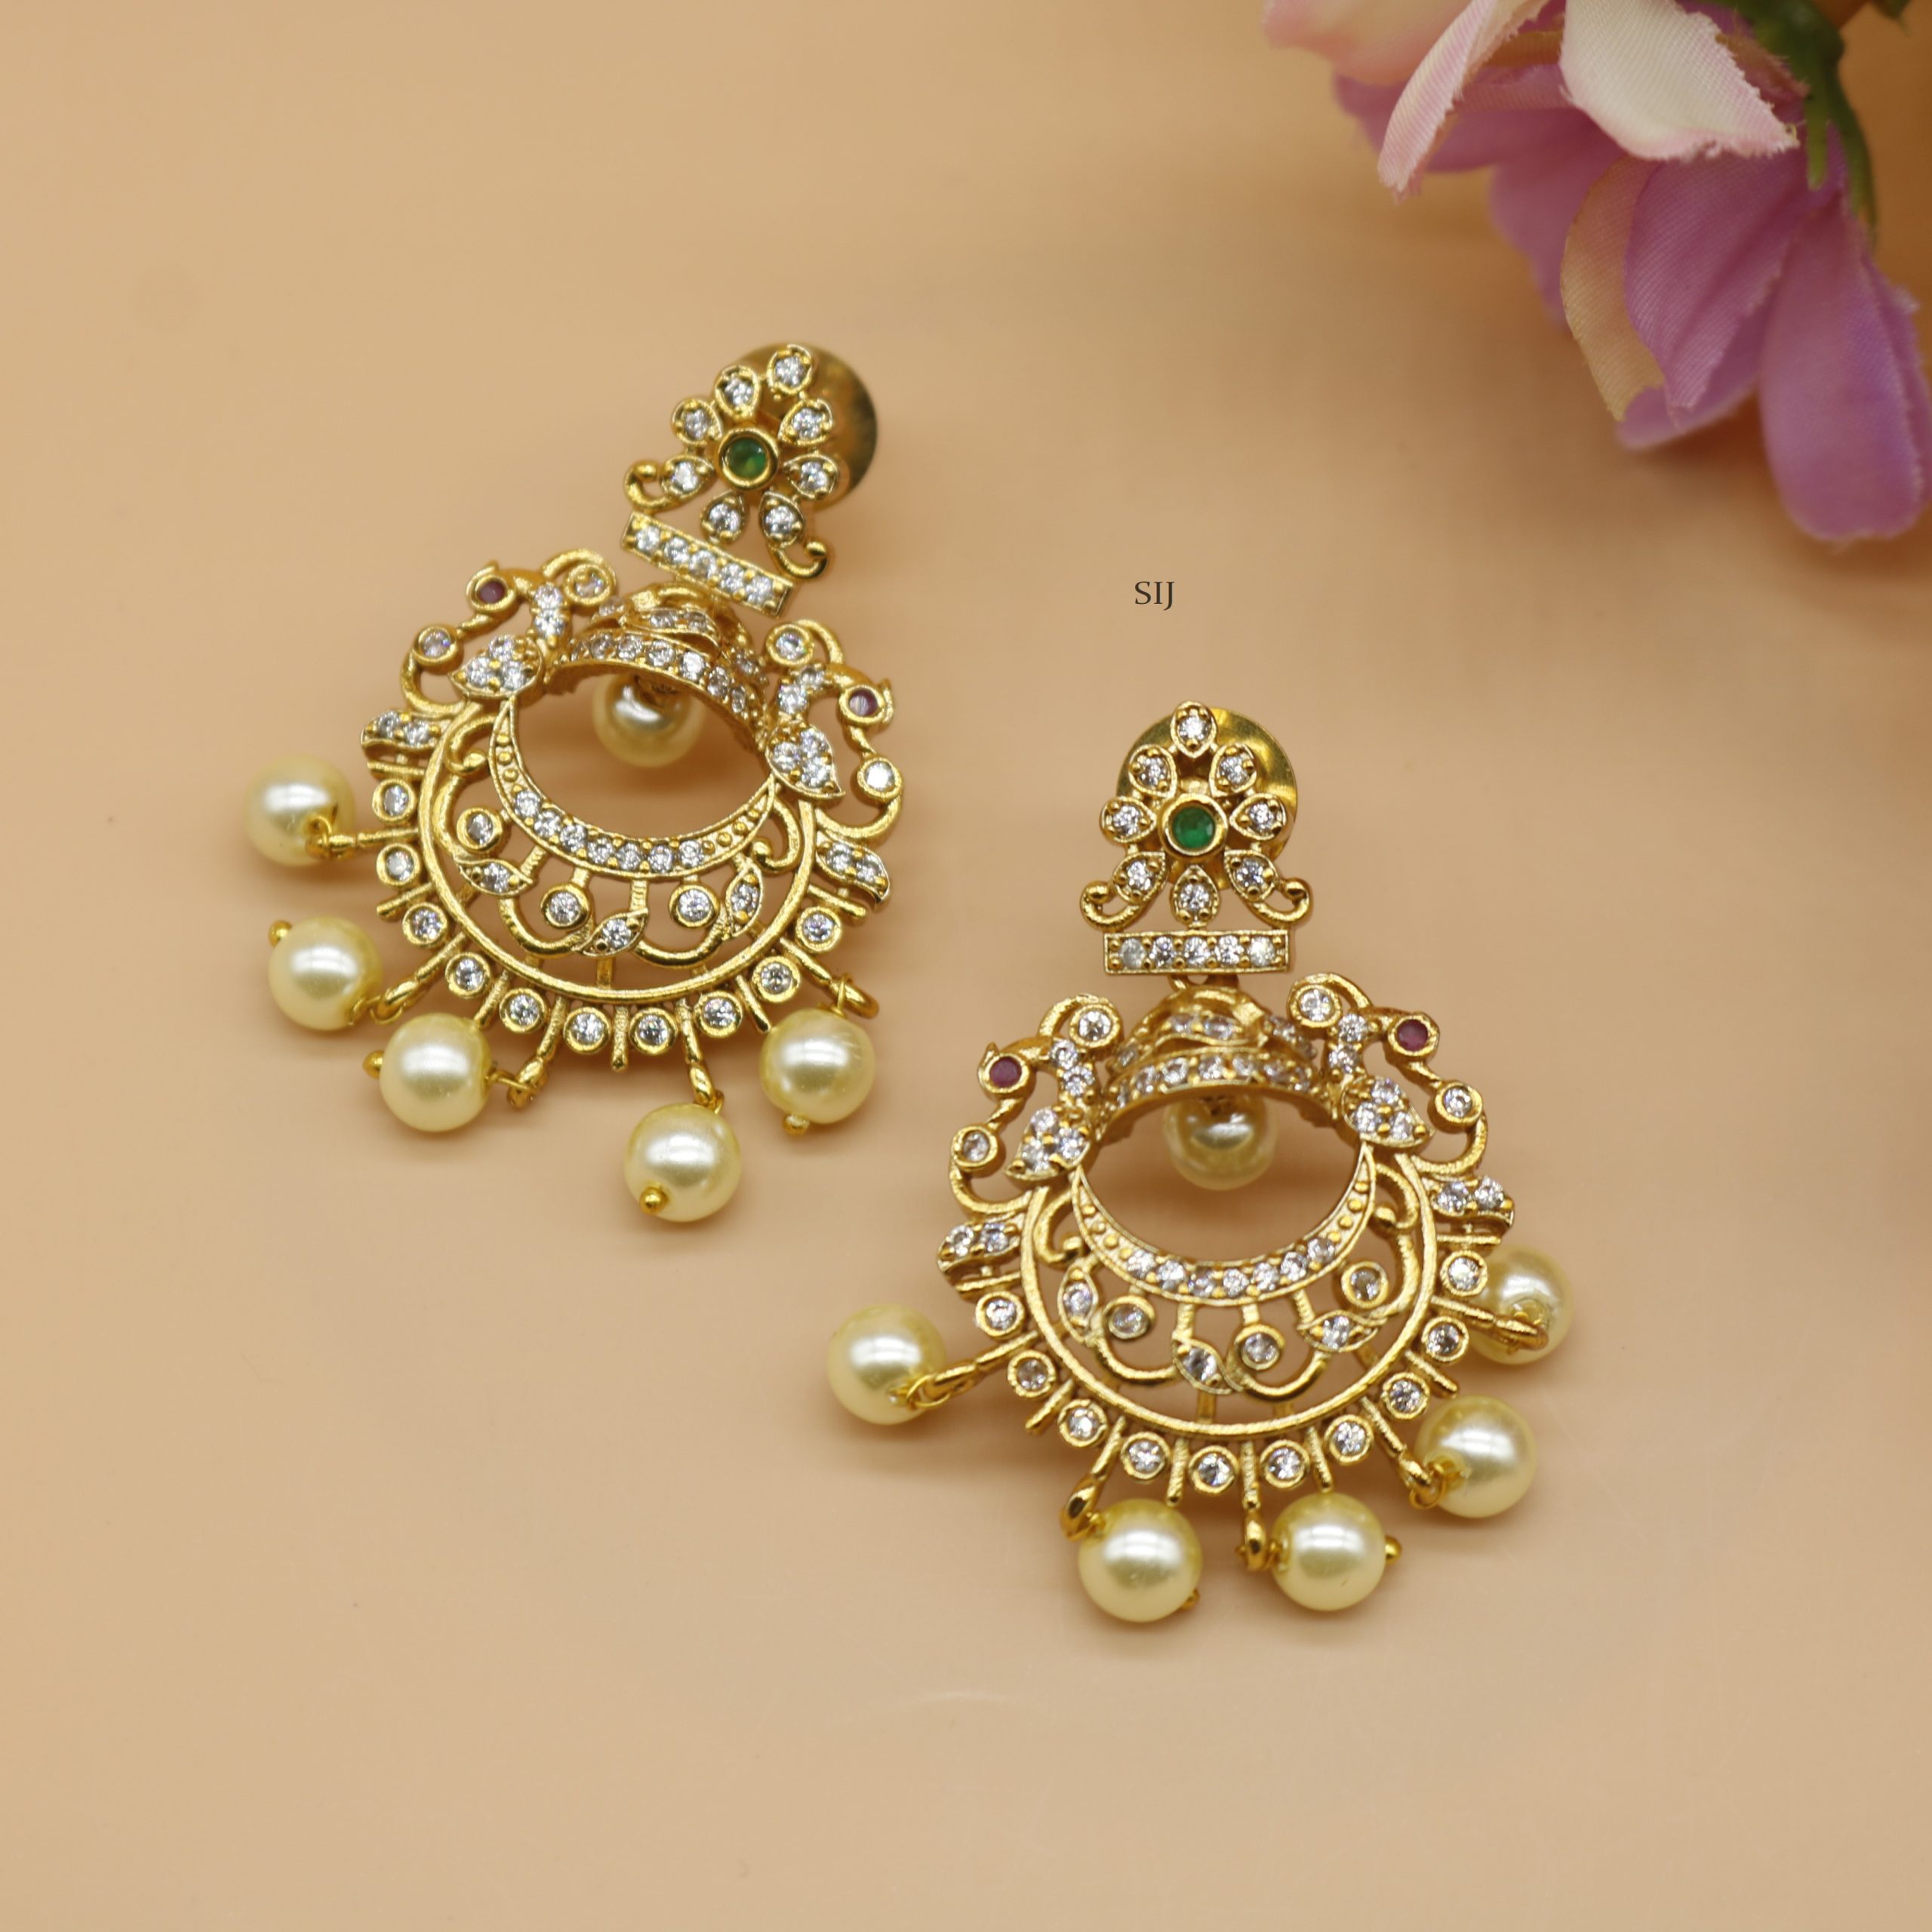 Gorgeous Chand Bali Pearls Earrings